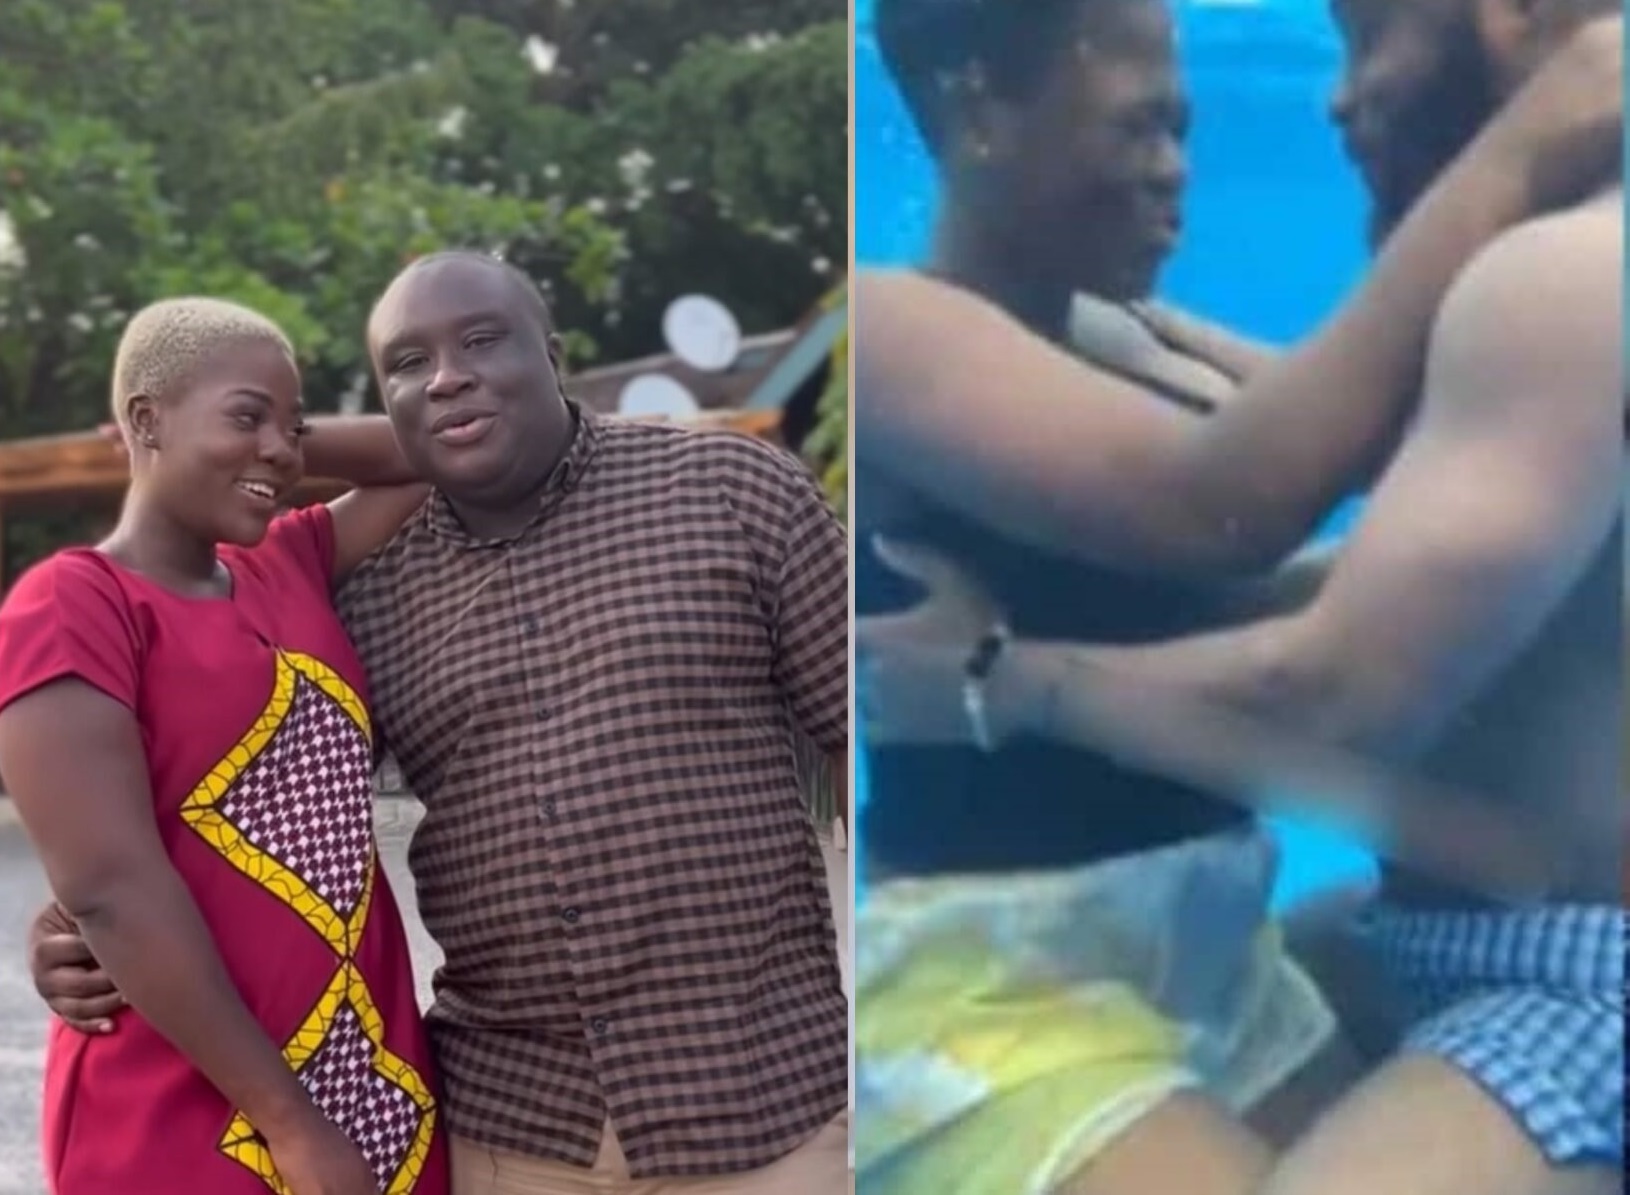  TikTok Star, Asantewaa Finally Posts Video Of Lovey-Dovey Moment With Husband To Deny Claims Of Cheating With Her Manager